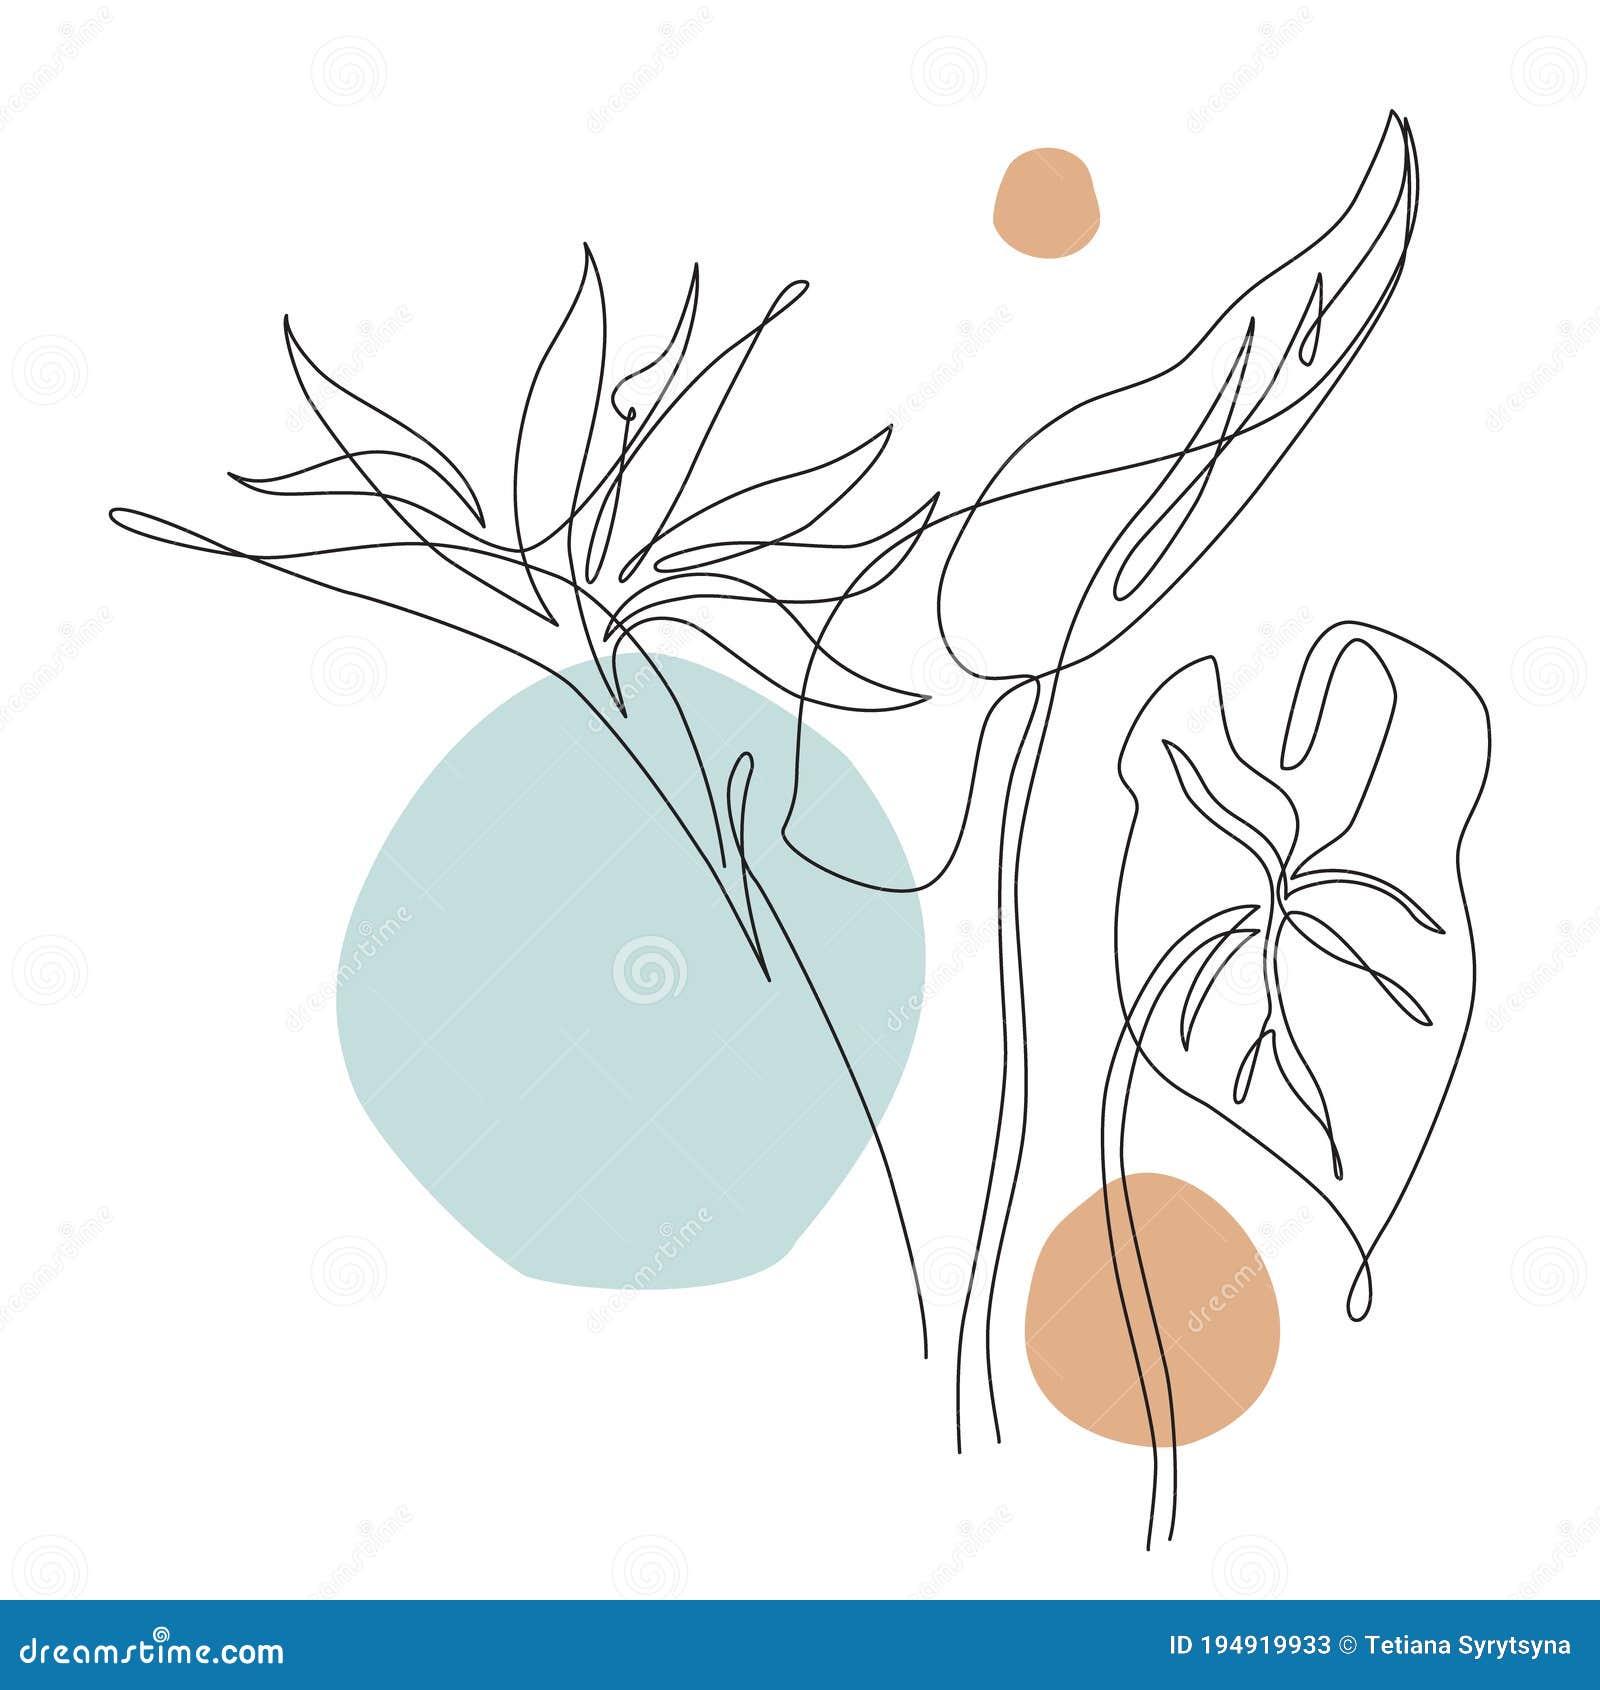 elegant continuous line drawing. minimal art flowers and leaves  on white backgroud